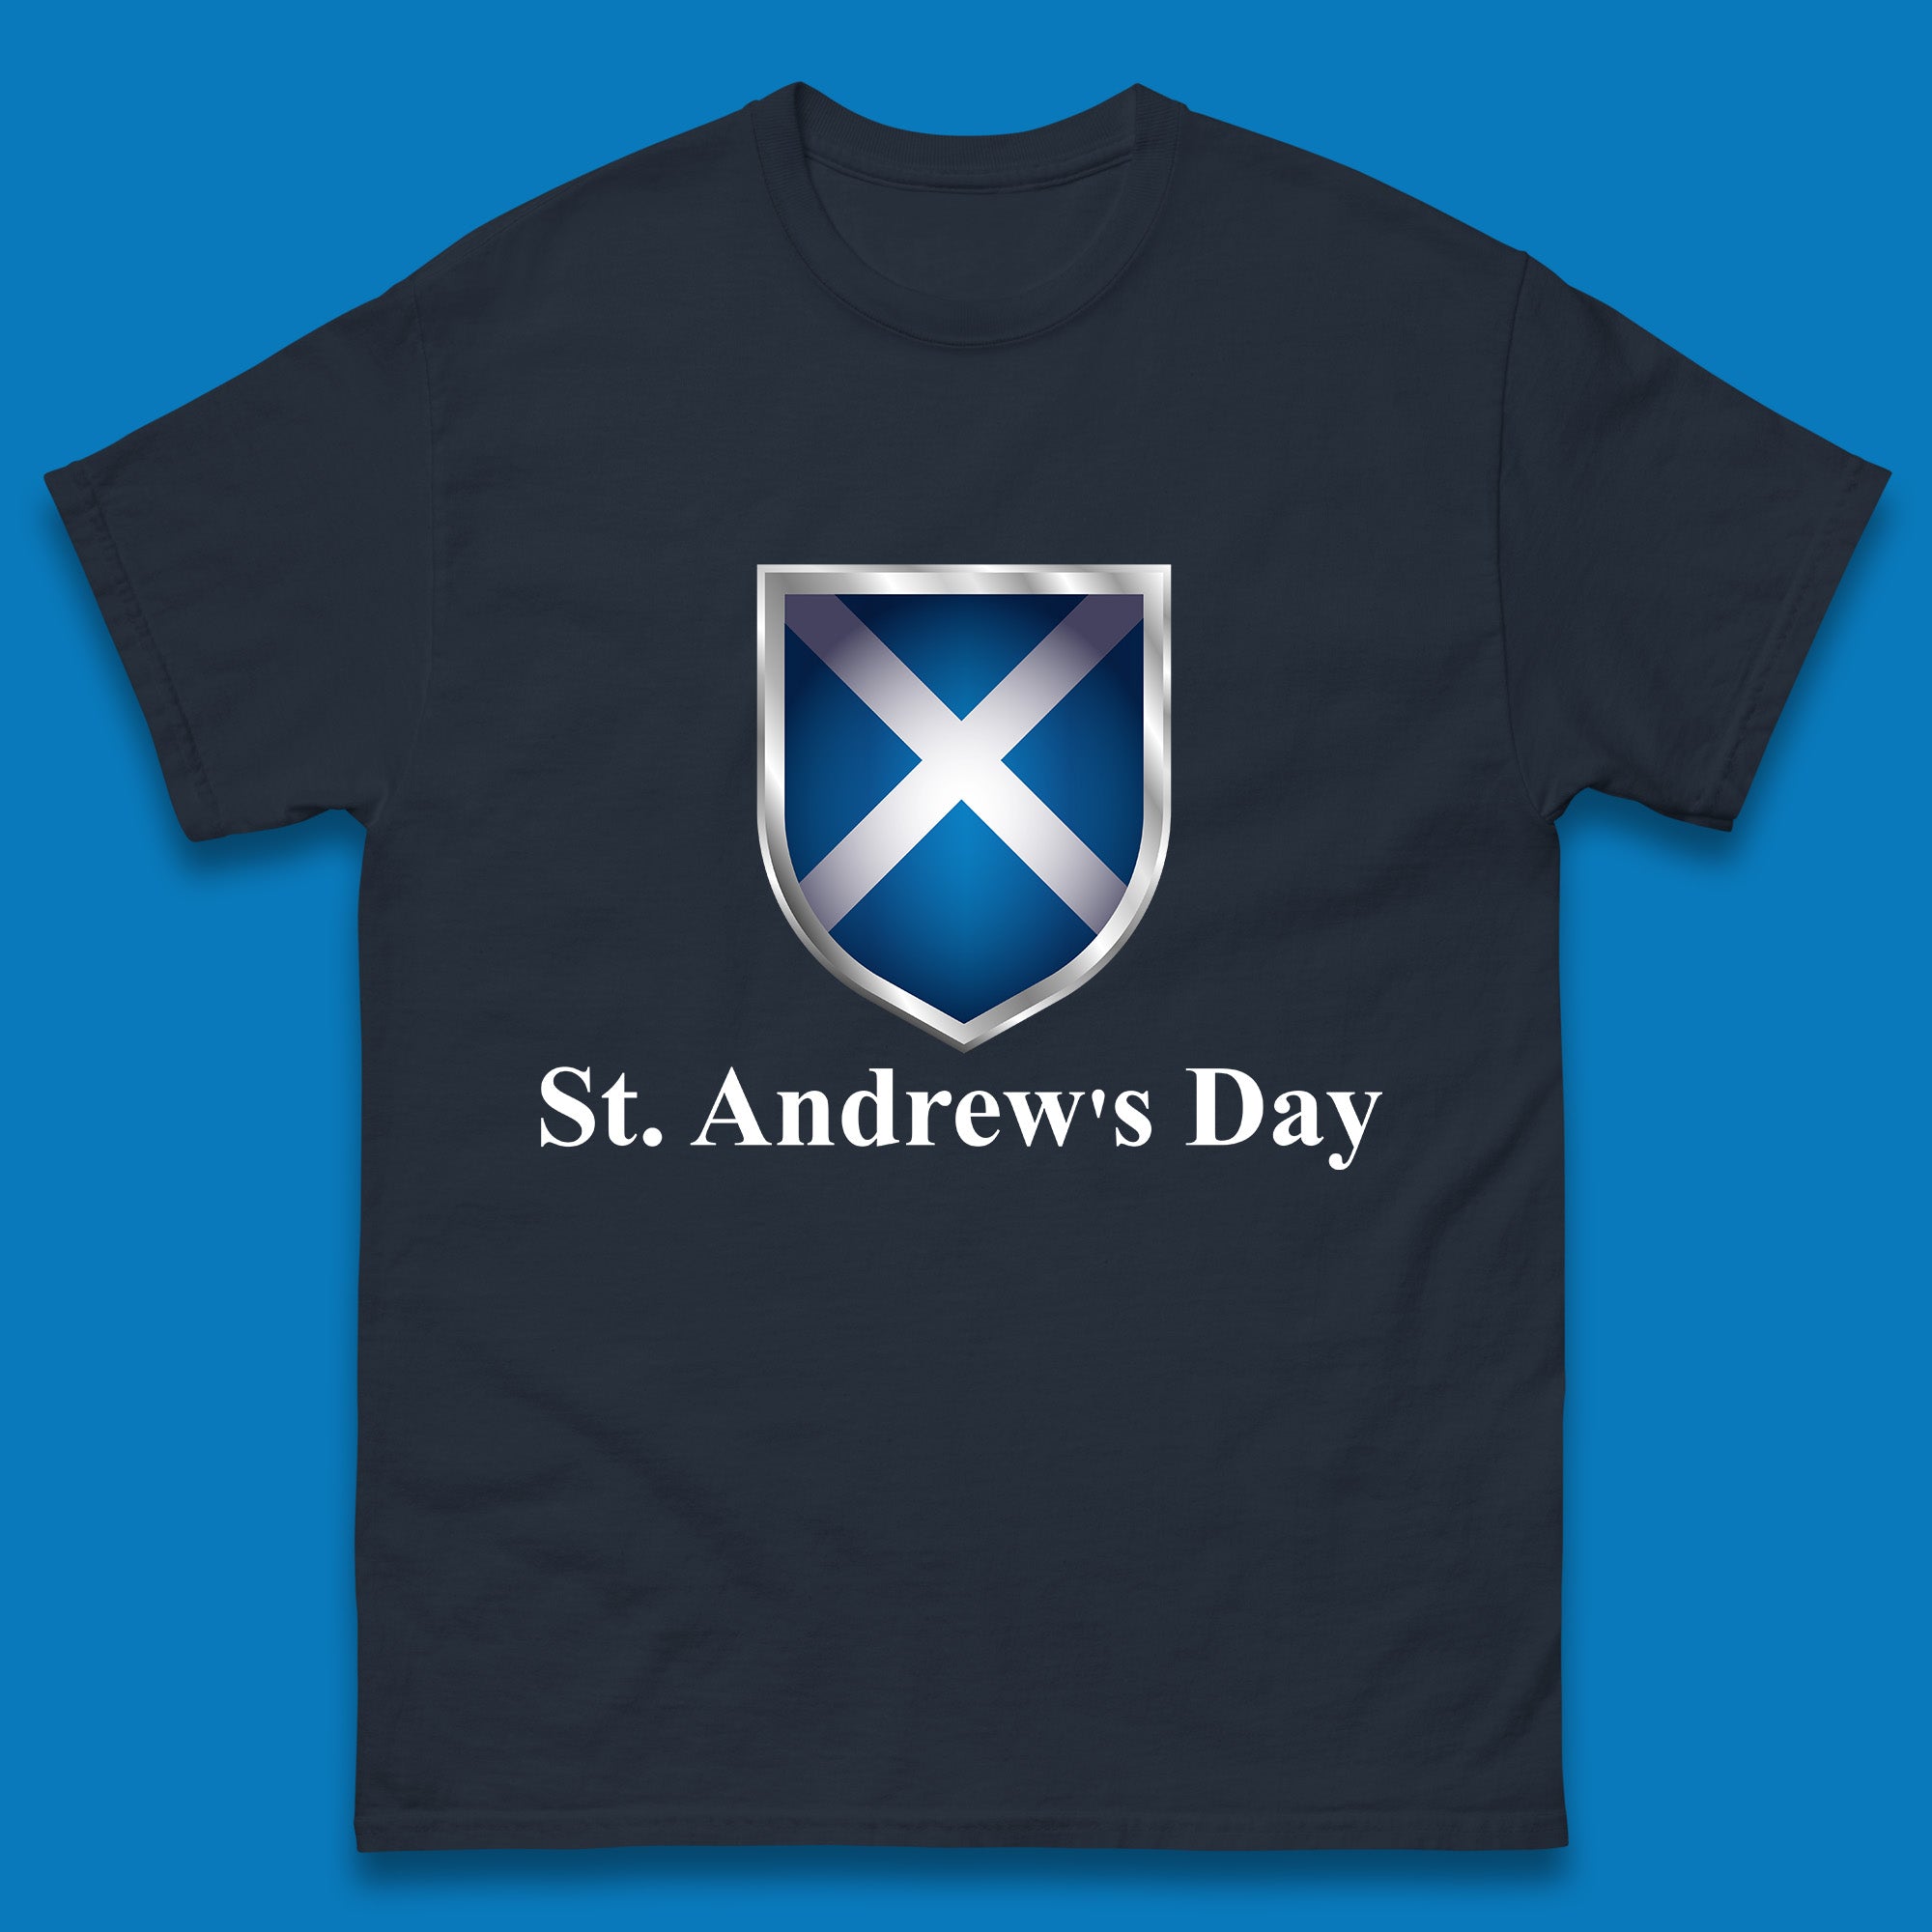 St. Andrew's Day Scotland Flag Scottish Flag Proud to be Scottish Feast of Saint Andrew Mens Tee Top